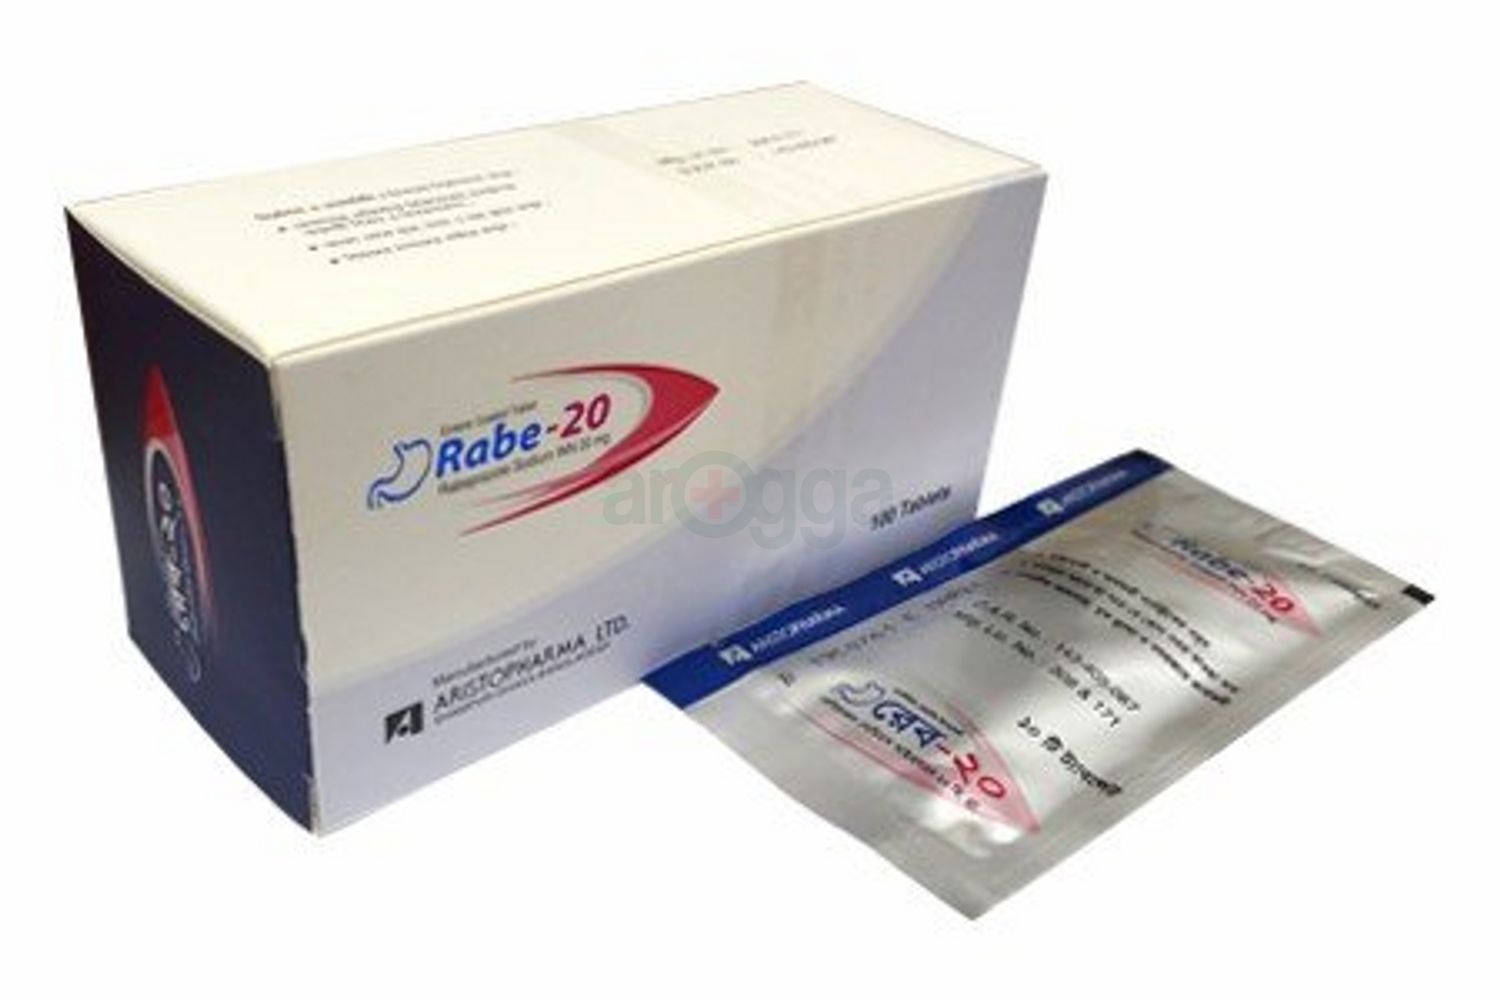 Rabe 20 Tablet